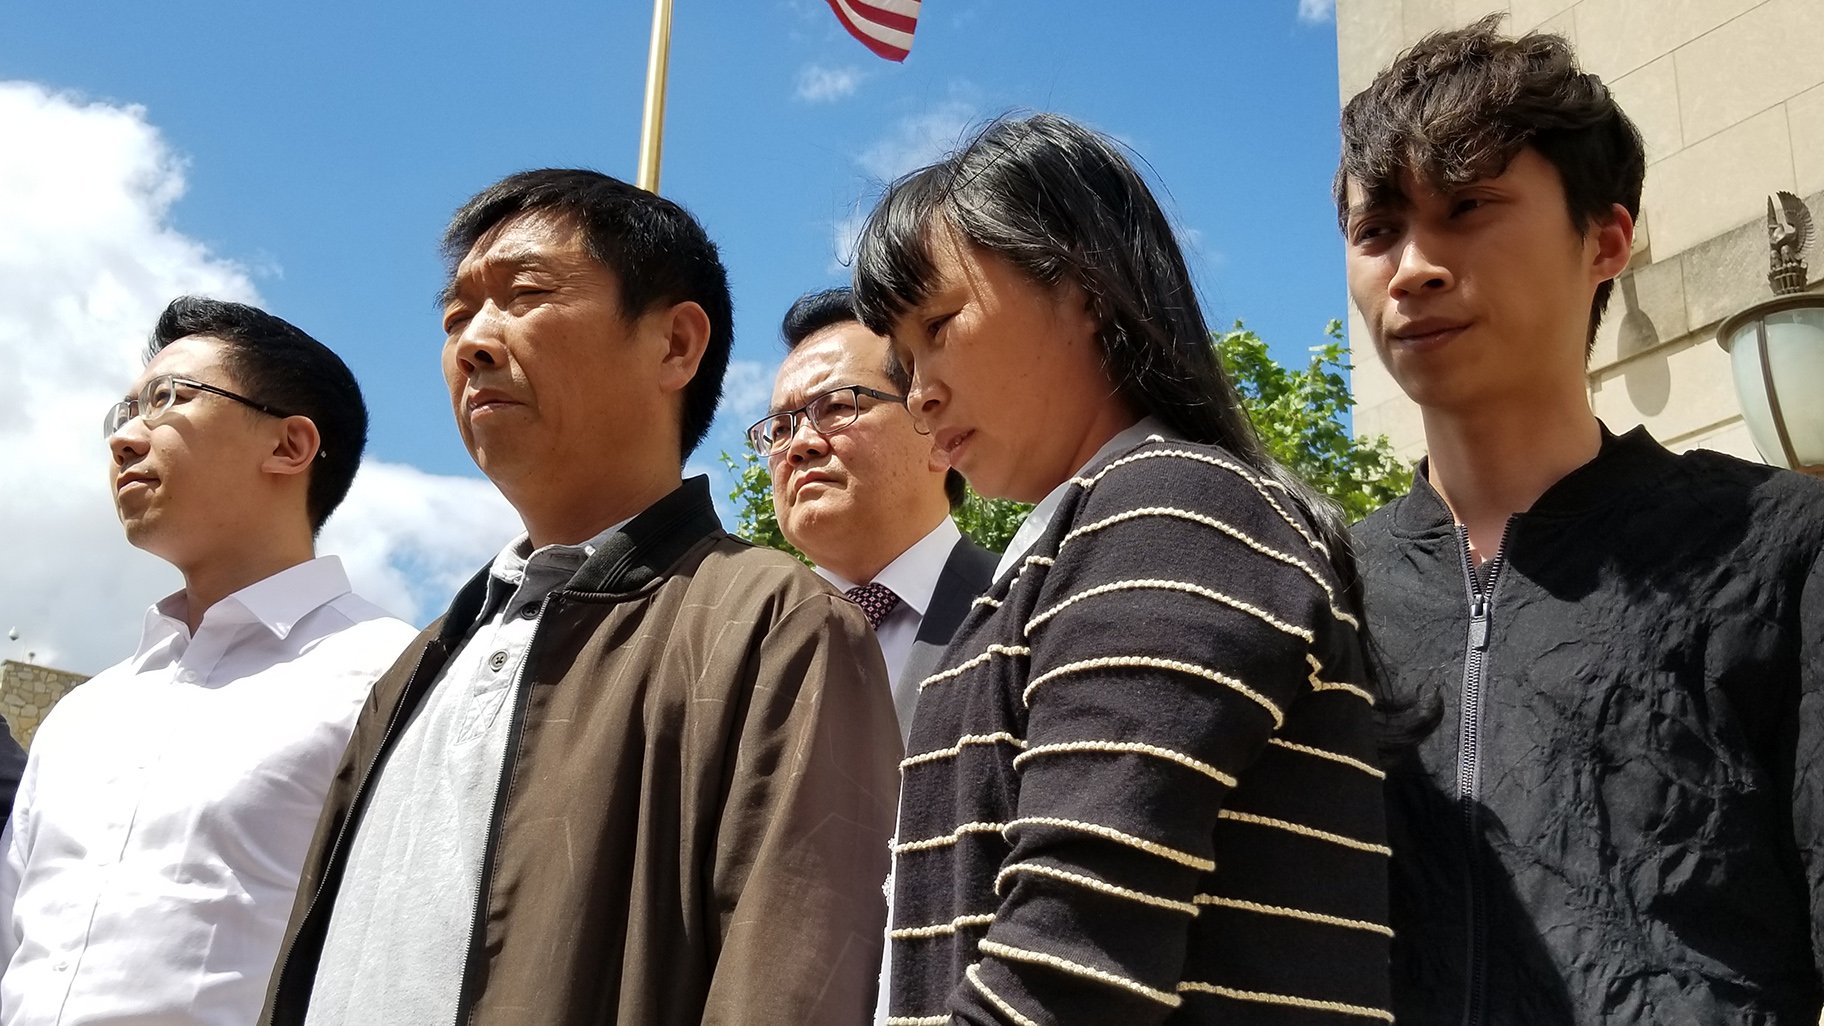 From left to right: Xiaolin Hou, Ronggao Zhang, Lifeng Ye and  Zhengyang Zhang stand outside the Peoria federal court building on June 24, 2019. (Matt Masterson / WTTW News)